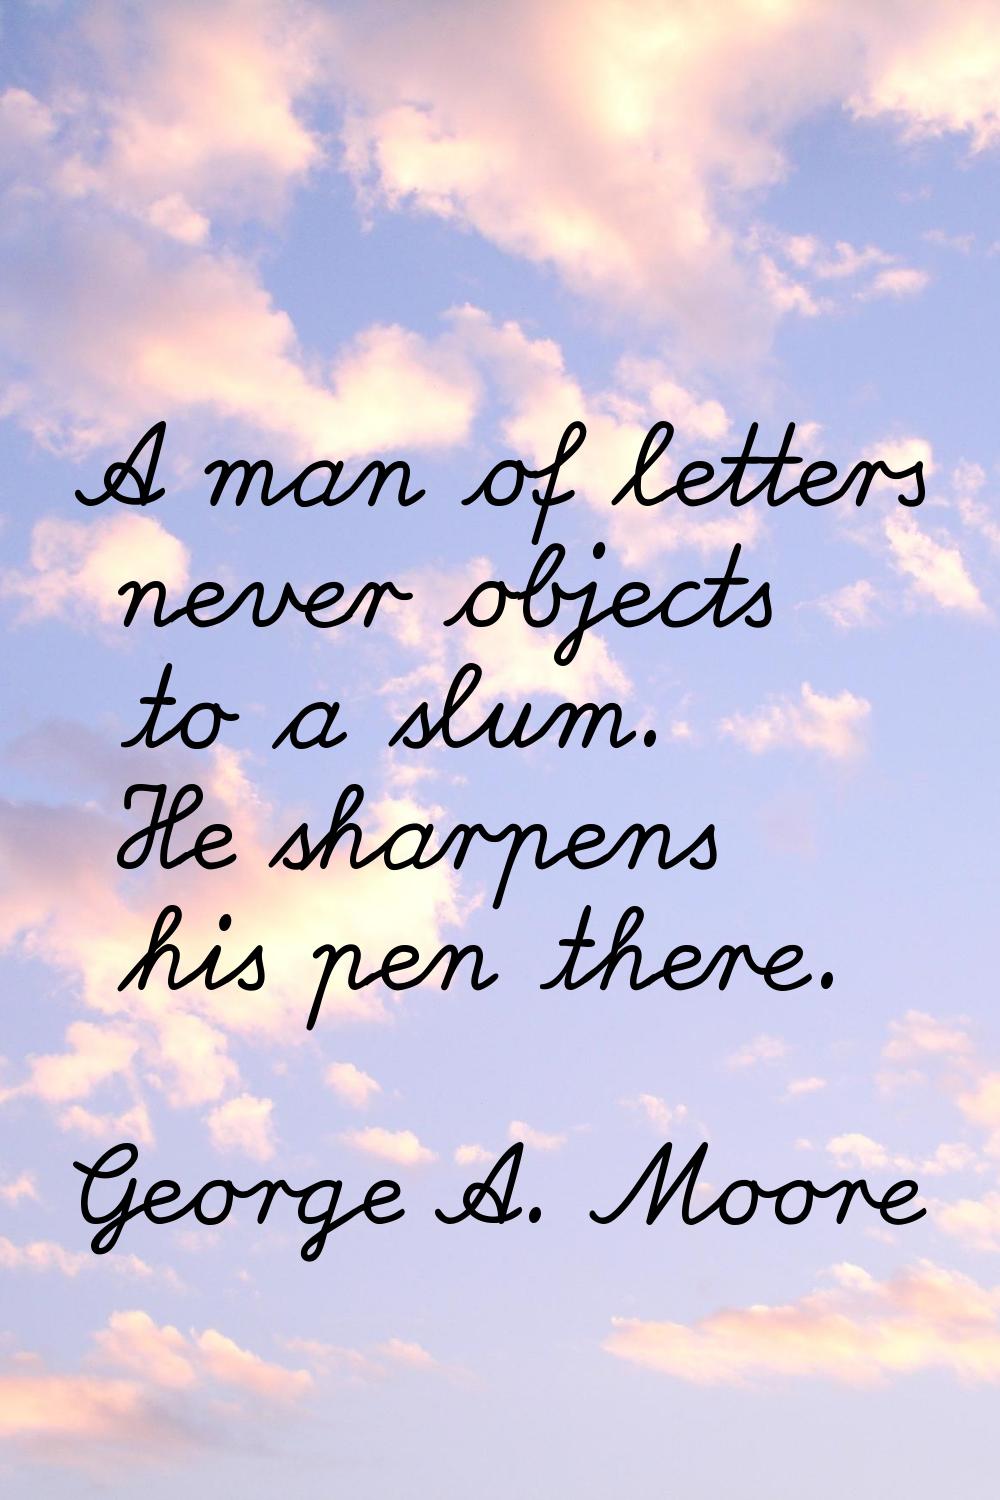 A man of letters never objects to a slum. He sharpens his pen there.